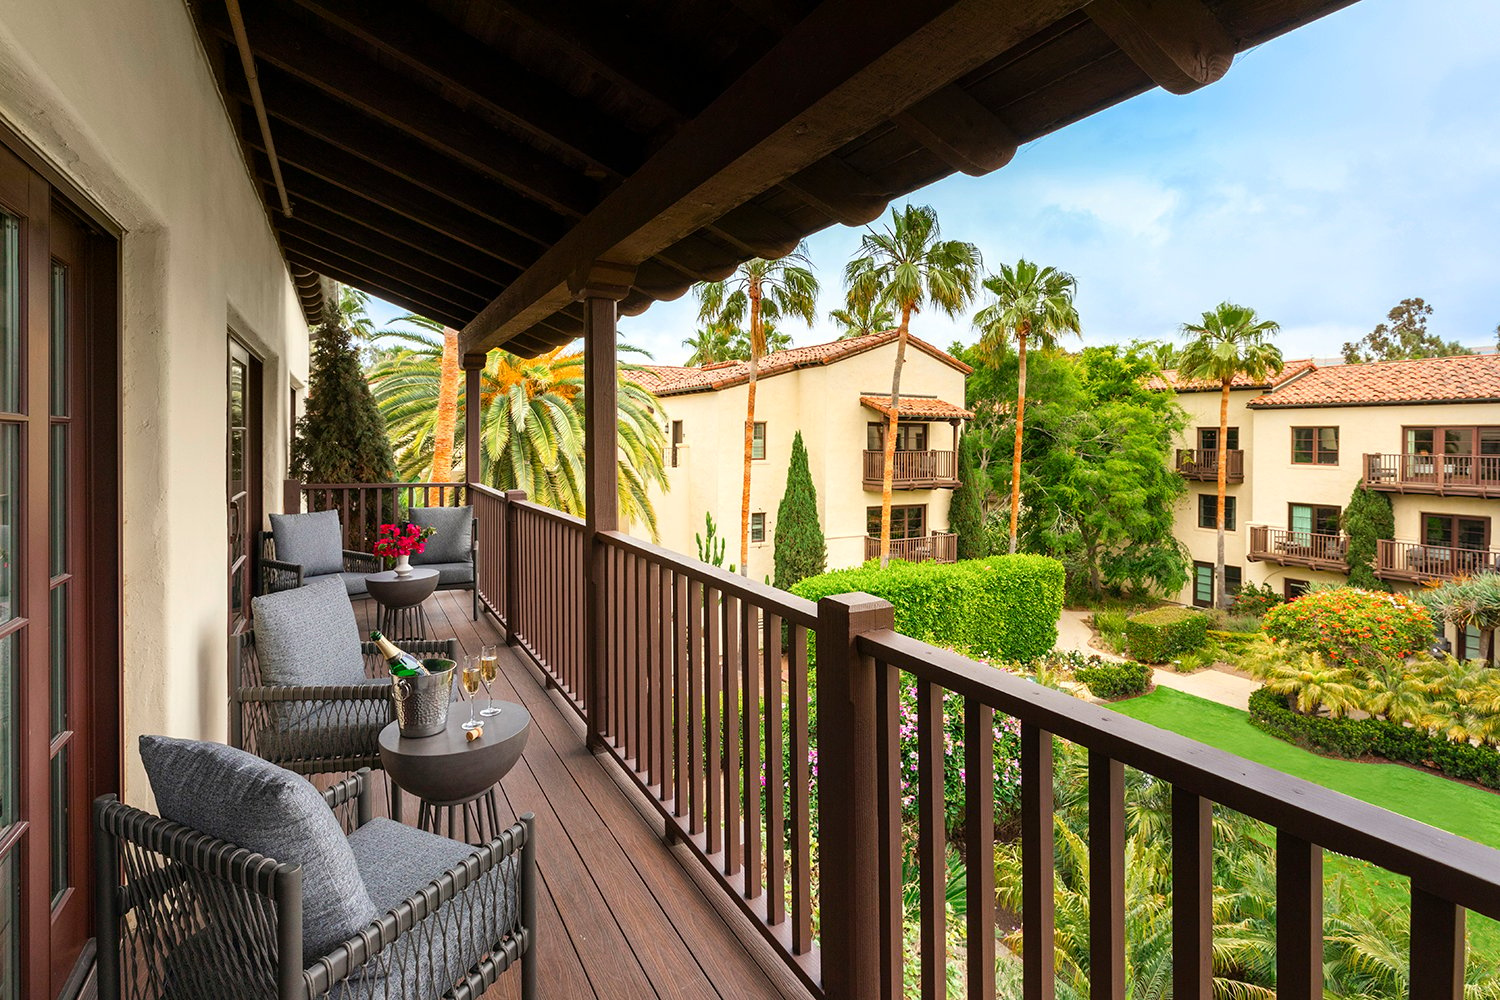 Estancia La Jollas updated guestrooms are meant to complement its upgraded lawns